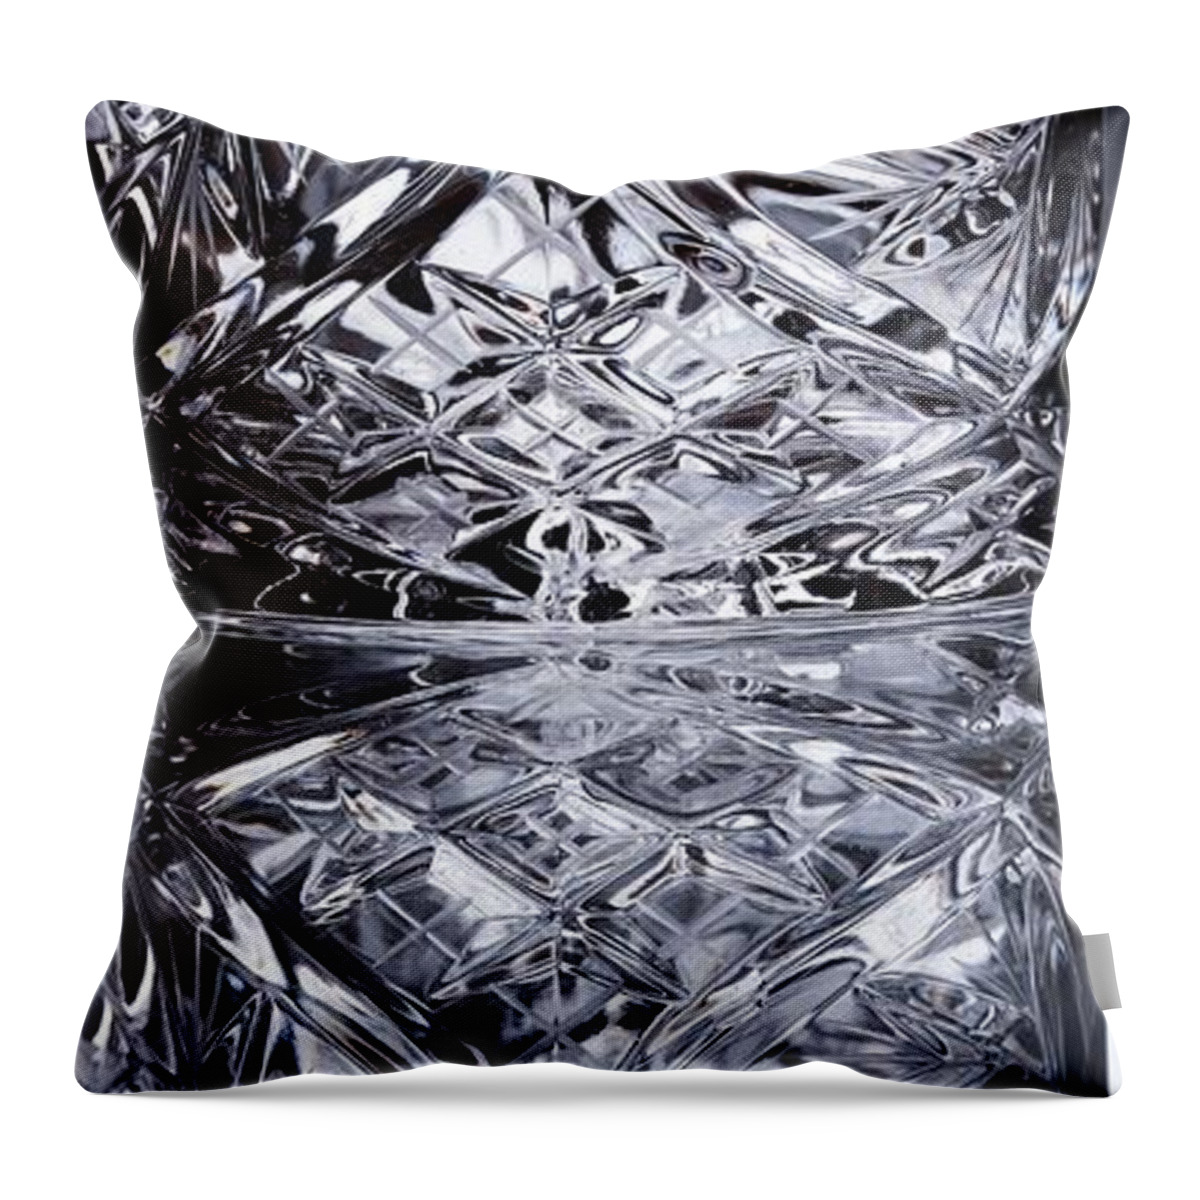 Crystal Glass Throw Pillow featuring the photograph Scotch Crystal Glass by Cristina Stefan